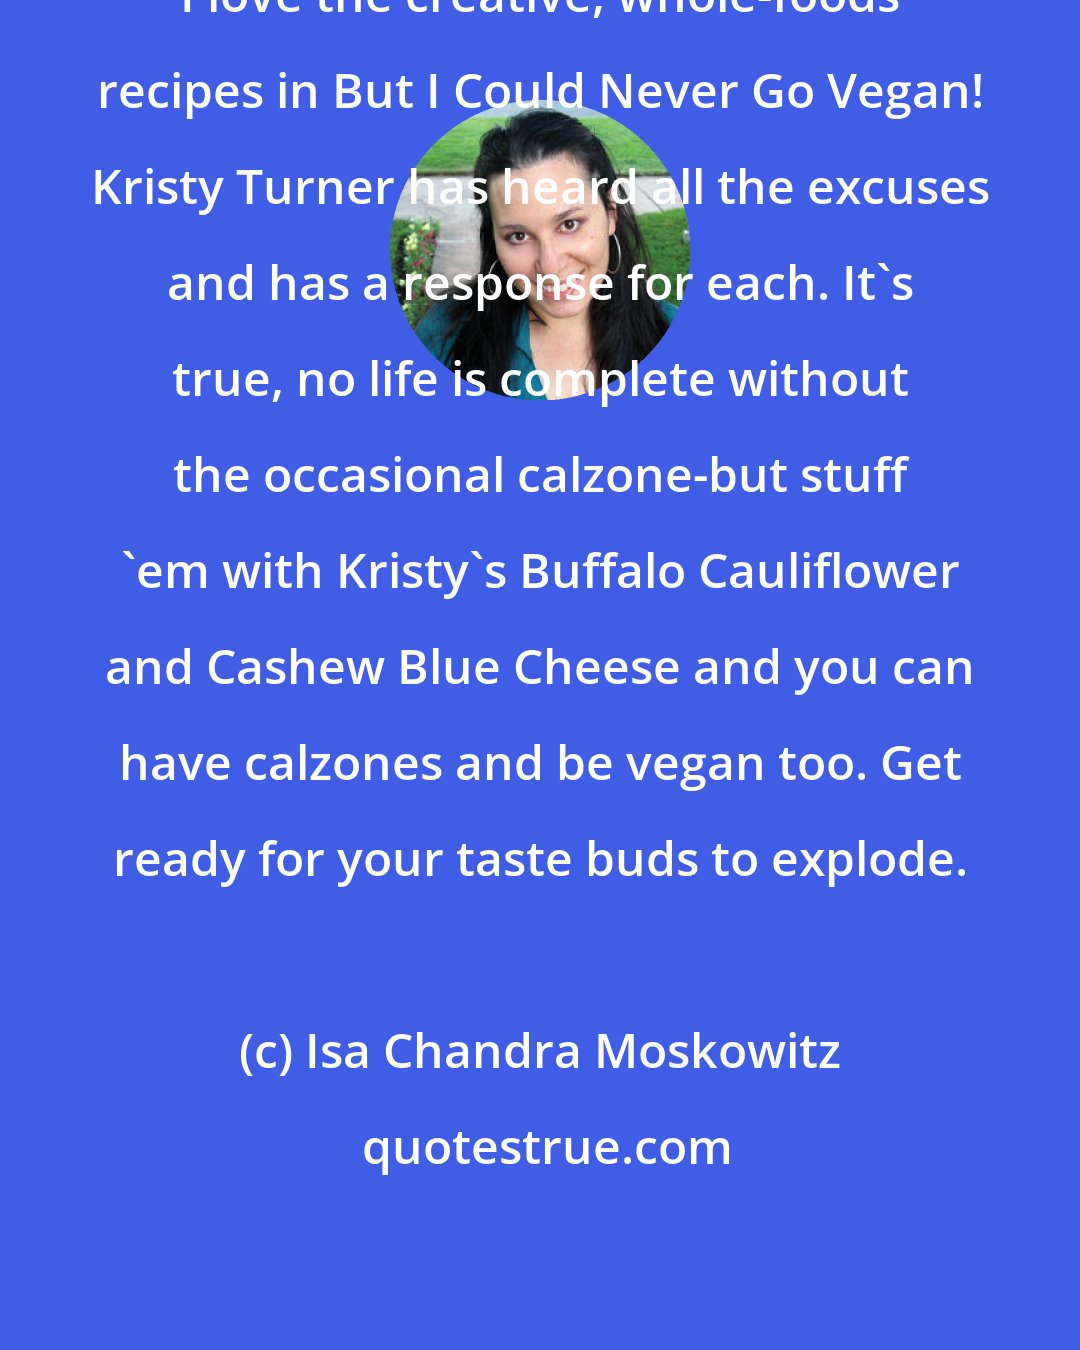 Isa Chandra Moskowitz: I love the creative, whole-foods recipes in But I Could Never Go Vegan! Kristy Turner has heard all the excuses and has a response for each. It's true, no life is complete without the occasional calzone-but stuff 'em with Kristy's Buffalo Cauliflower and Cashew Blue Cheese and you can have calzones and be vegan too. Get ready for your taste buds to explode.